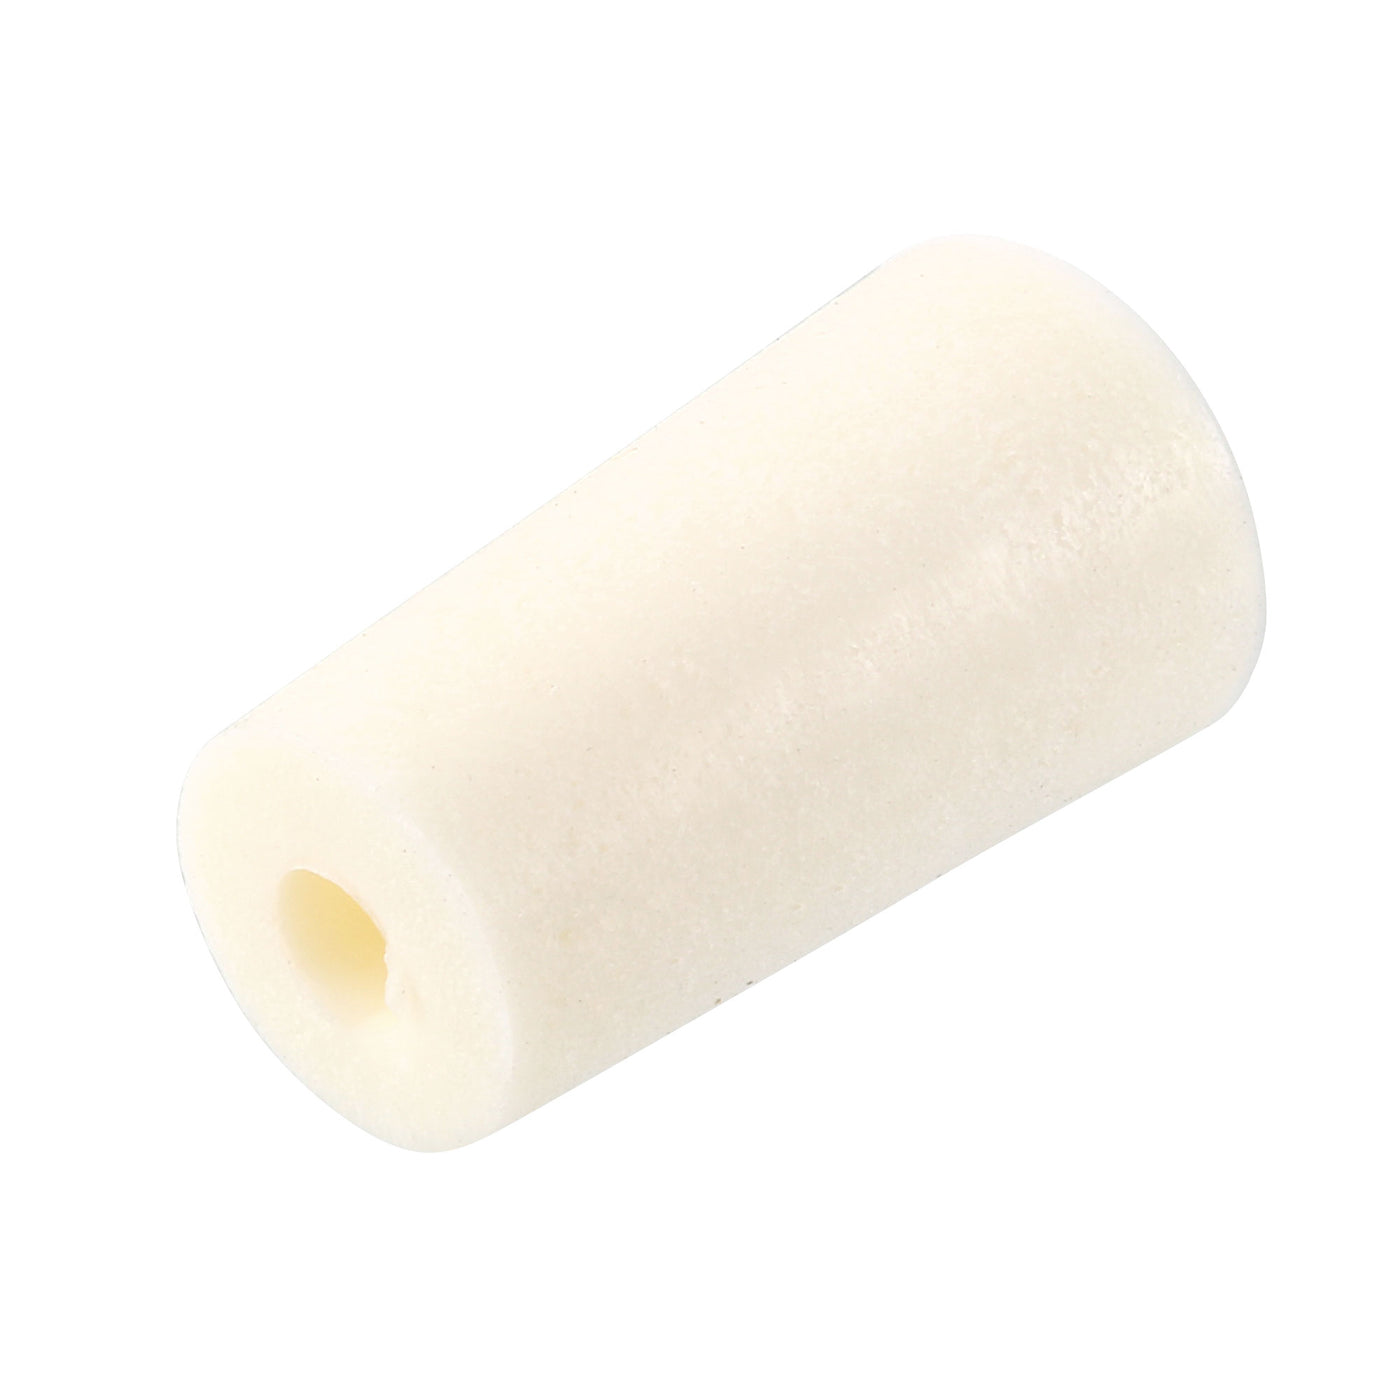 Uxcell Uxcell 15-19mm Beige Drilled Silicone Stopper Plugs for Flask Test Tube Stopper 5pcs